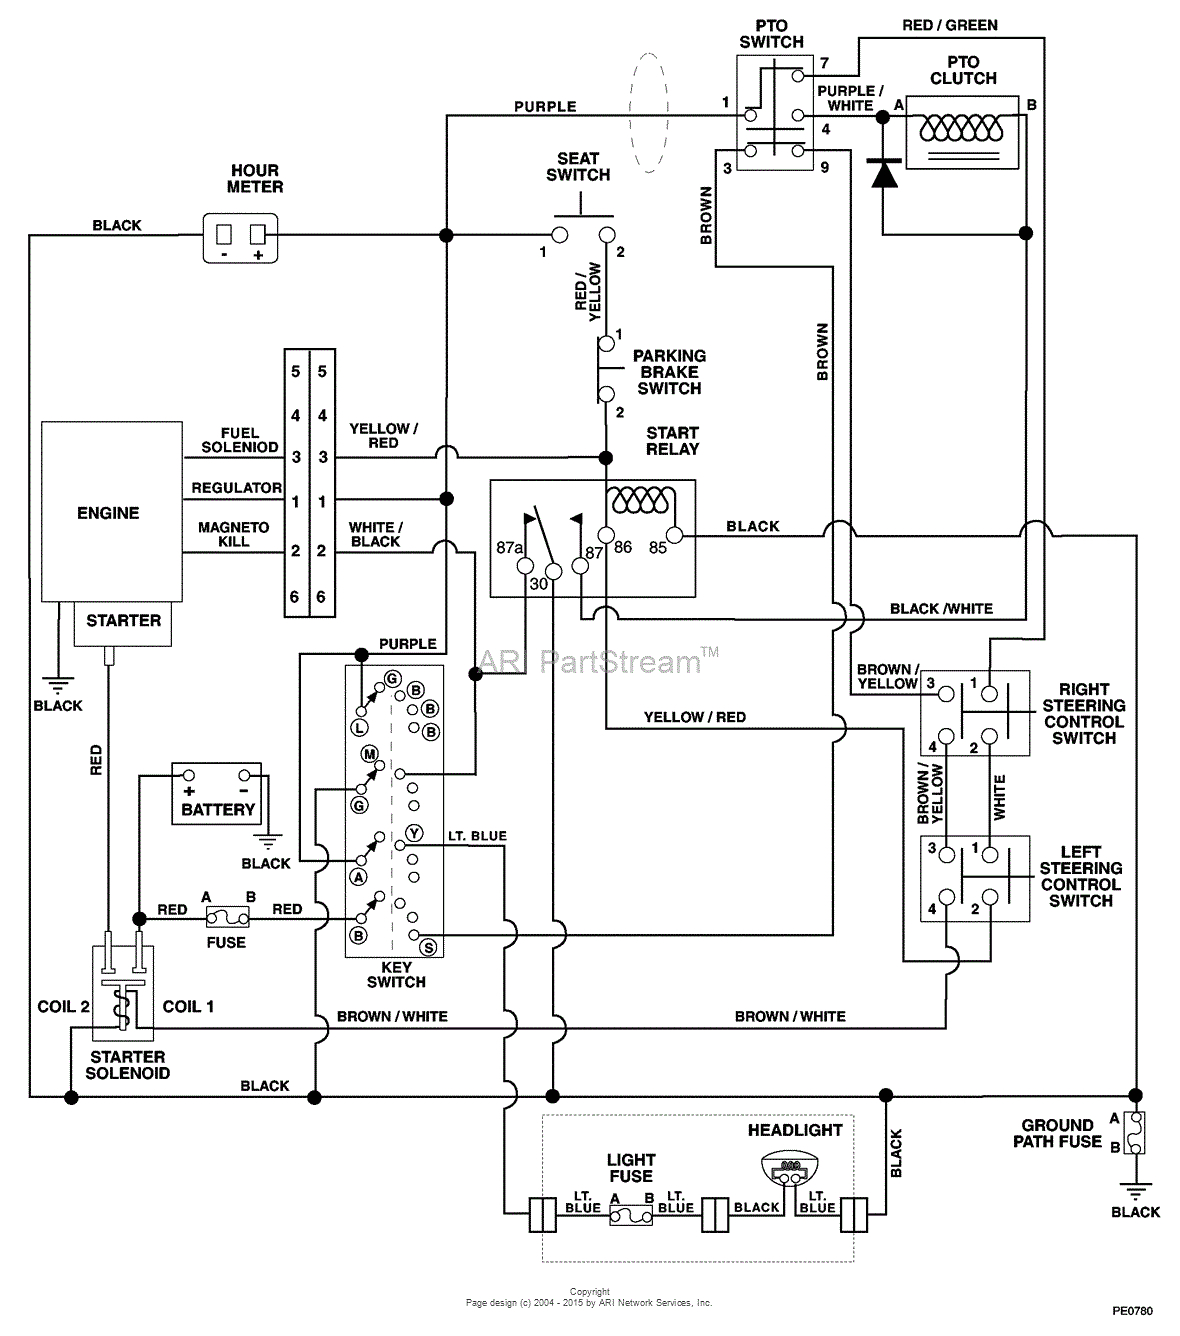 automotive diagrams archives page 275 of 301 wiring wiring diagram diagrams archives page 94 of 301 automotive wiring diagrams